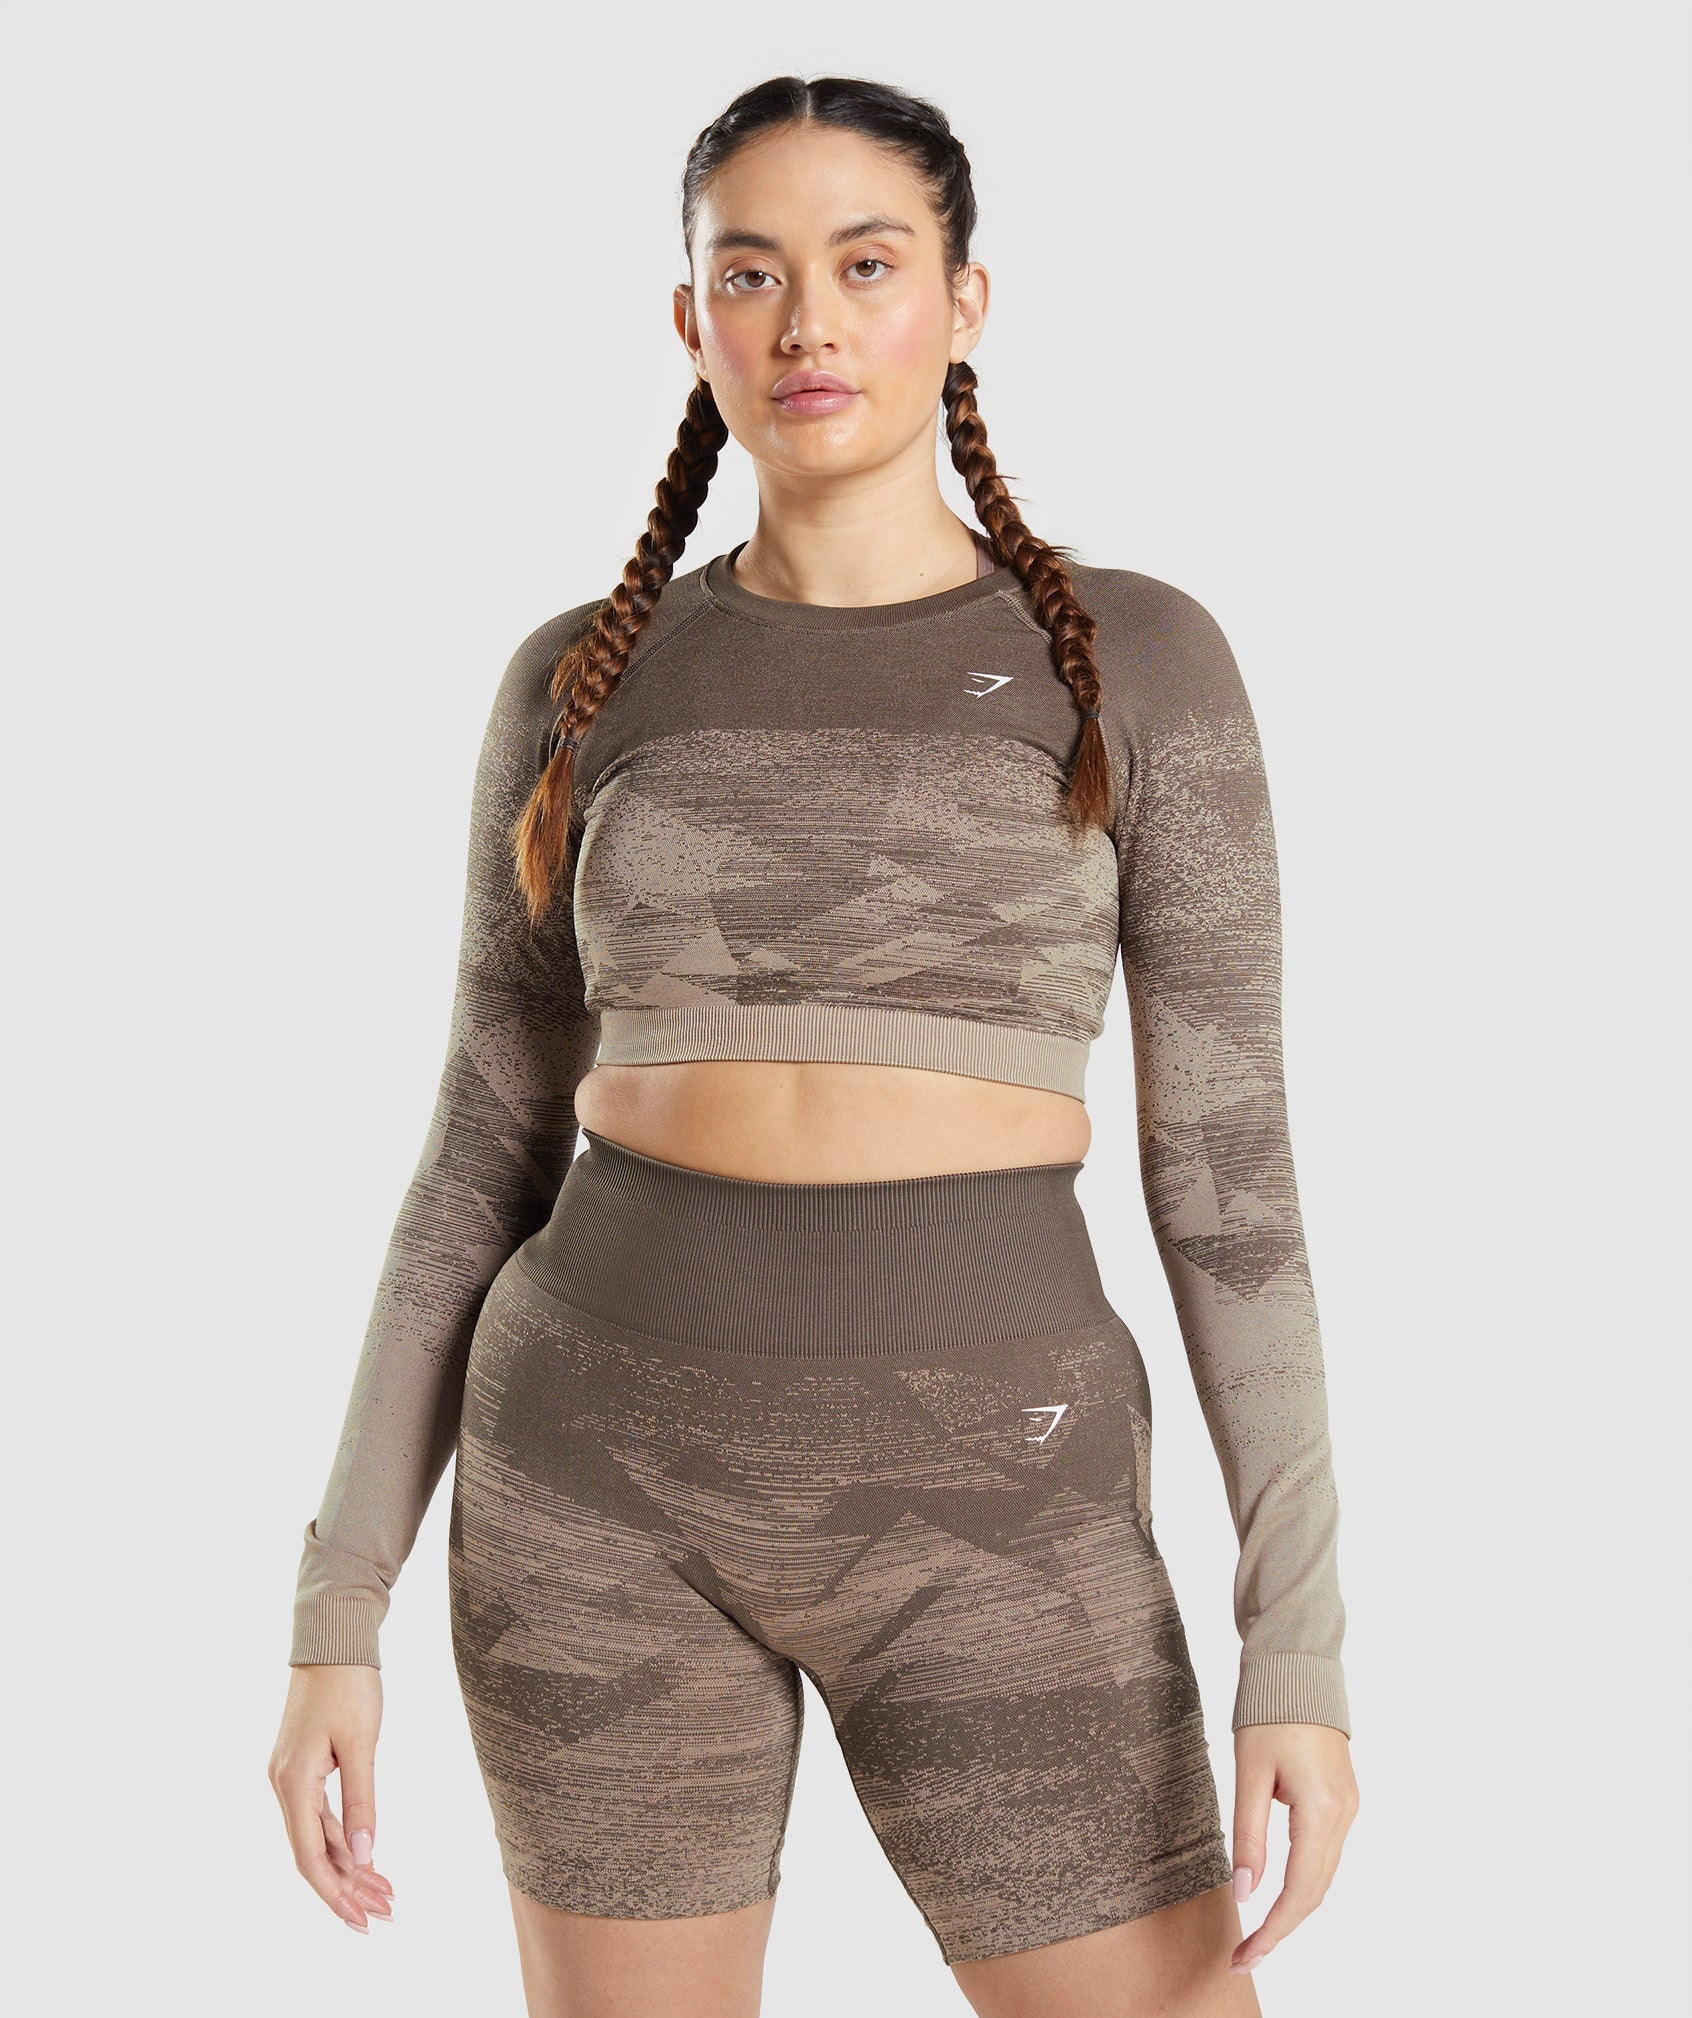 The Gymshark Ombre Seamless Crop Top is perfect for both cardio